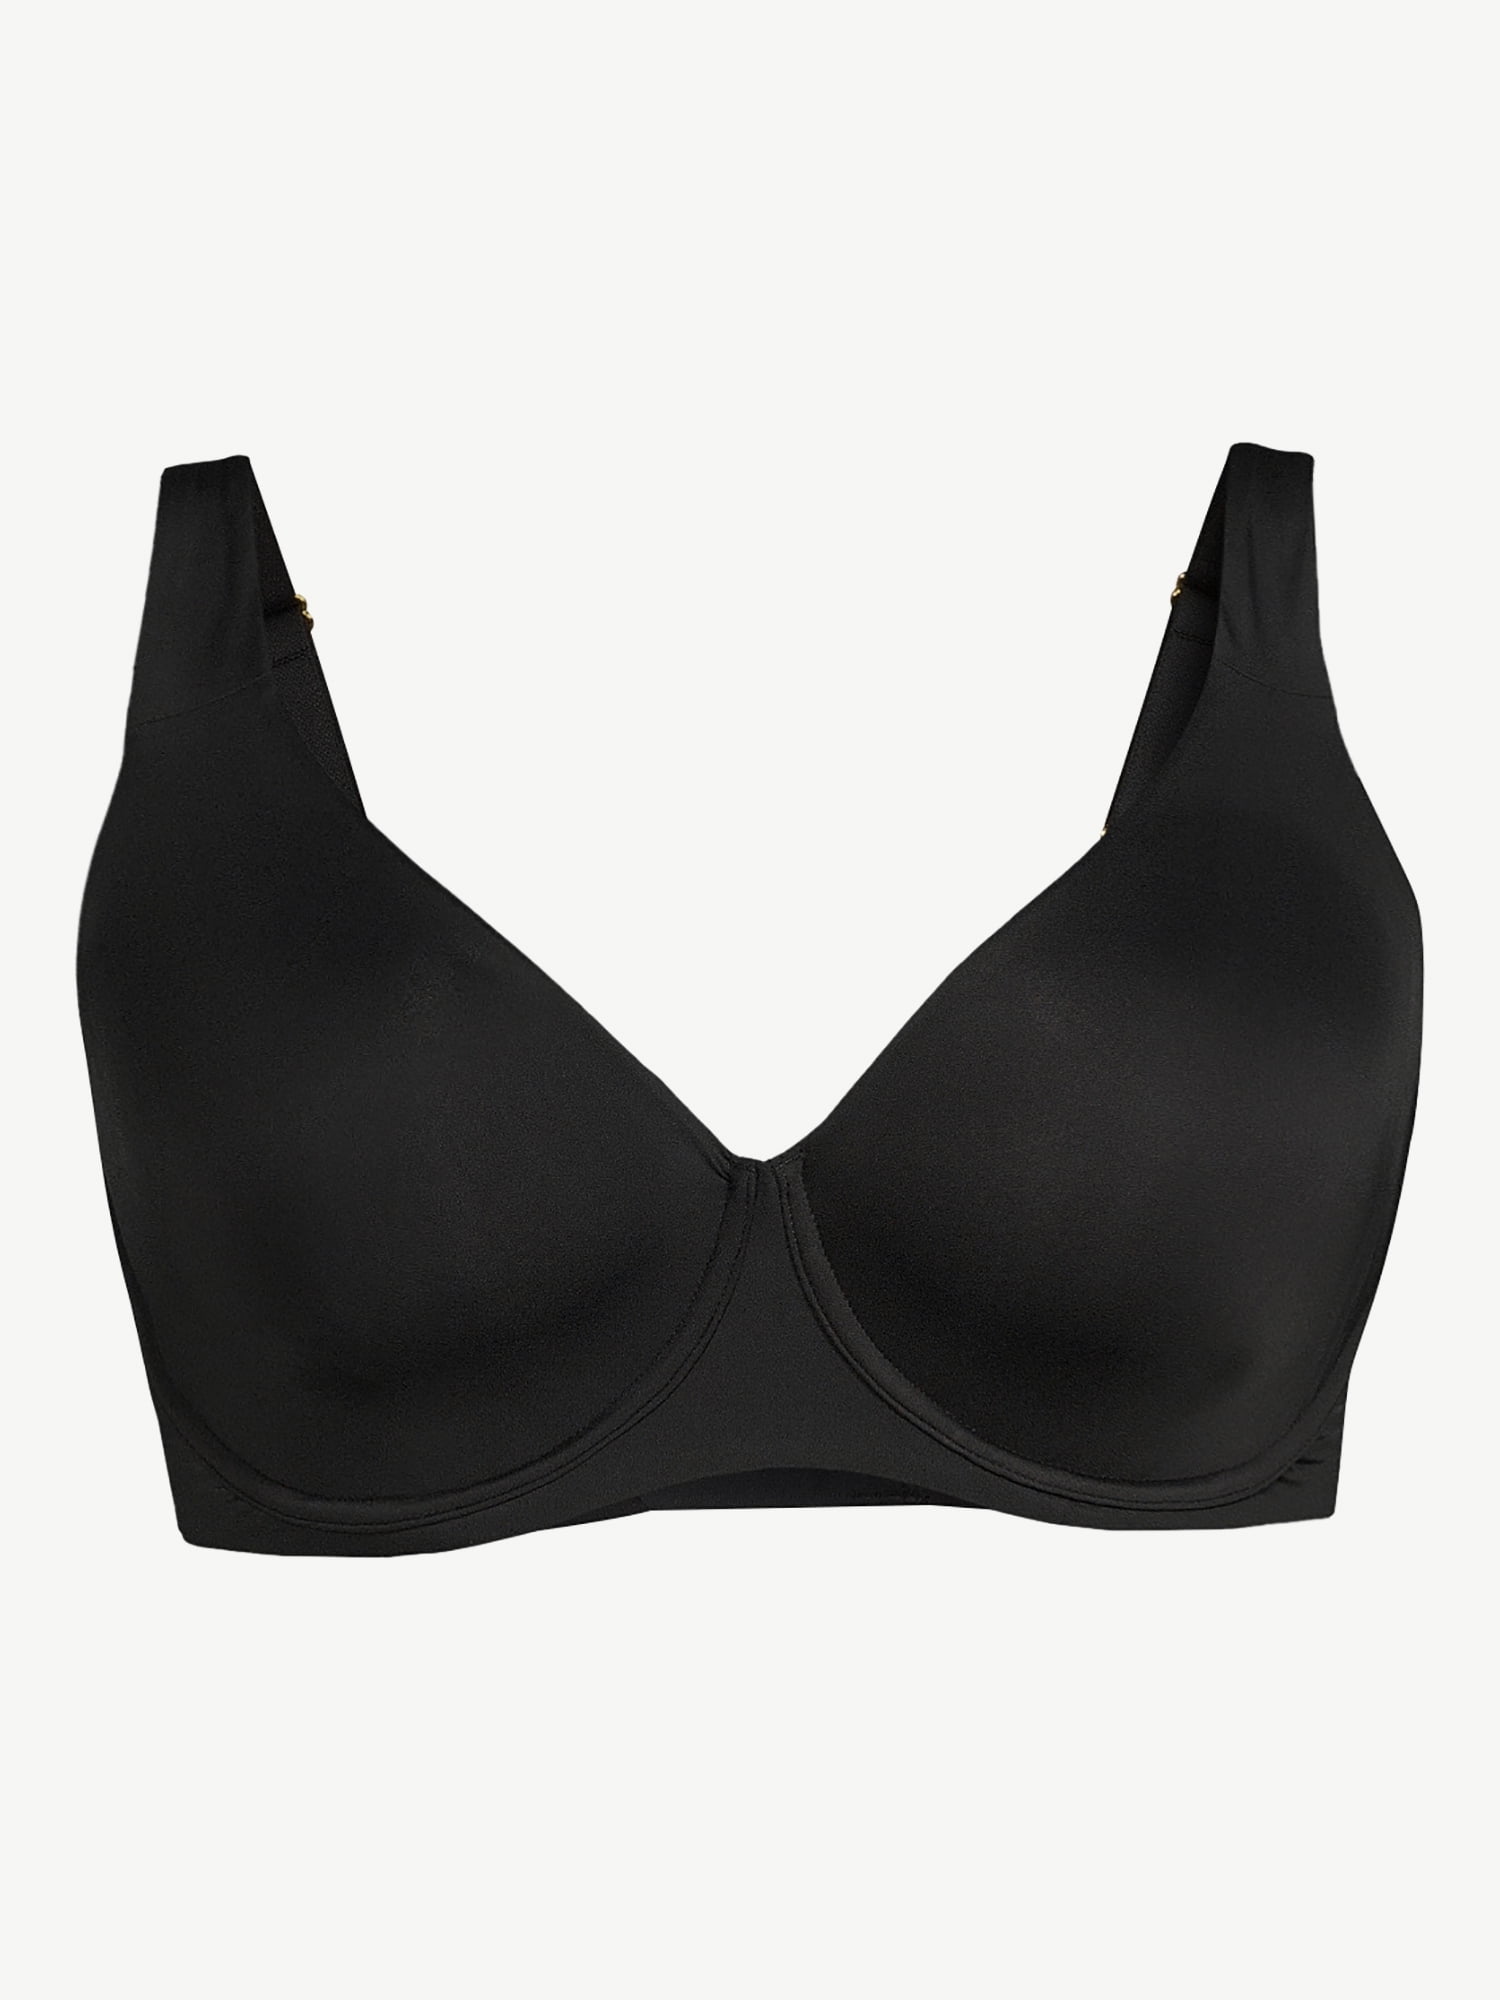 PrivateLifes New Definition For Freedom Women Stick-on Lightly Padded Bra -  Buy Black PrivateLifes New Definition For Freedom Women Stick-on Lightly  Padded Bra Online at Best Prices in India